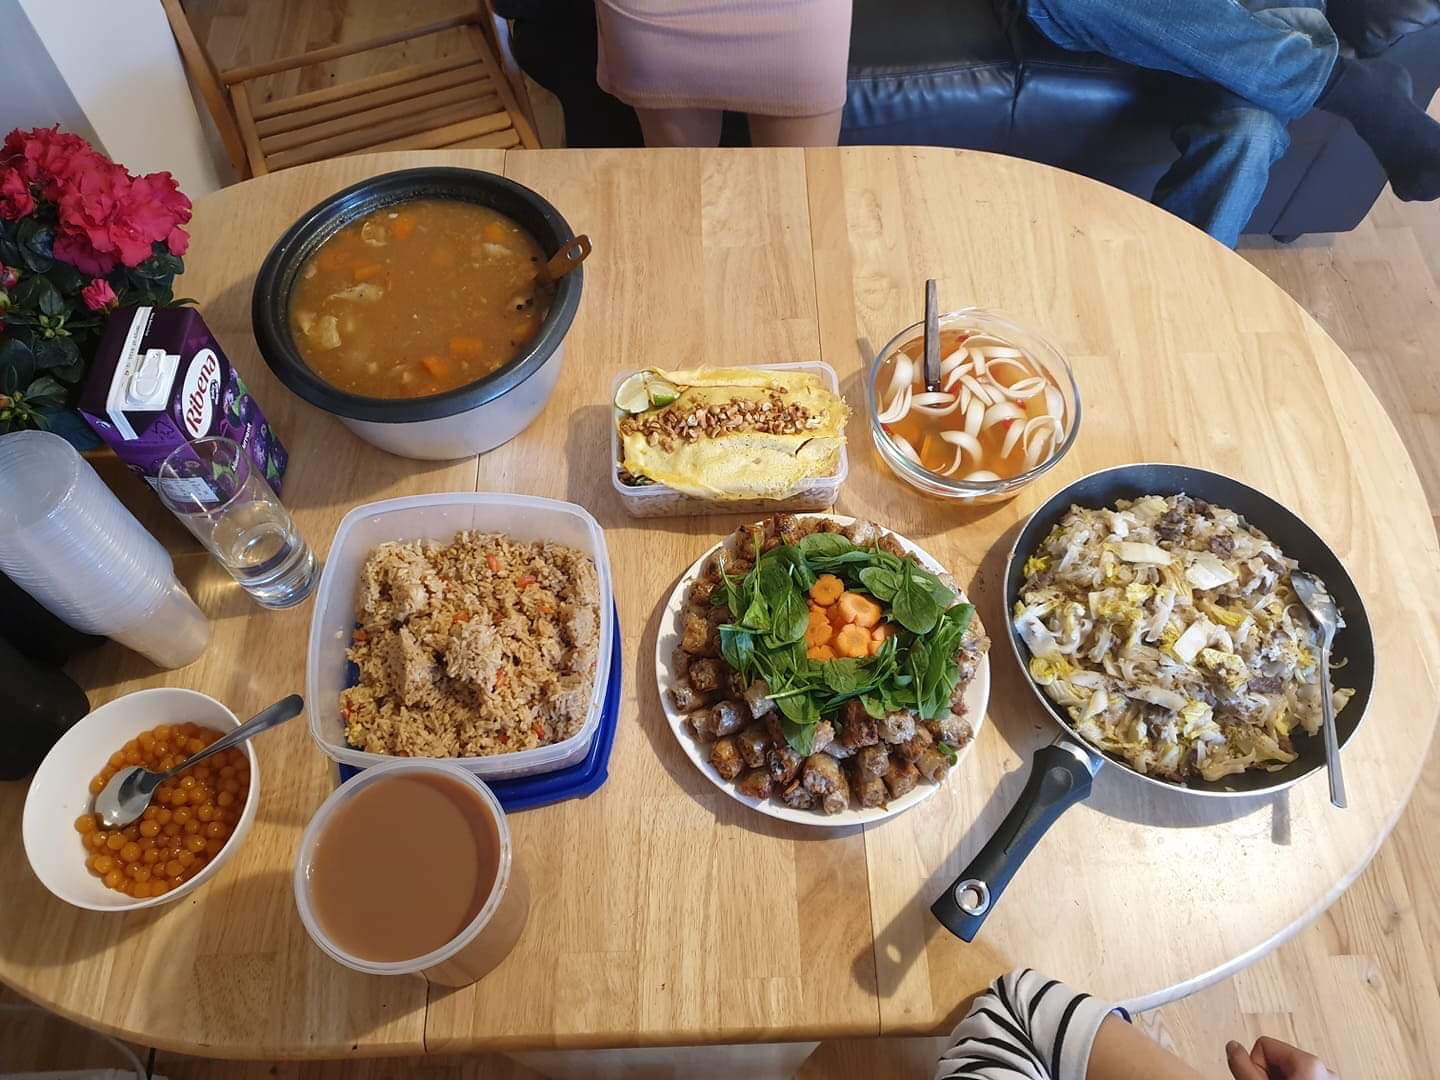 Table filled with international homemade dishes